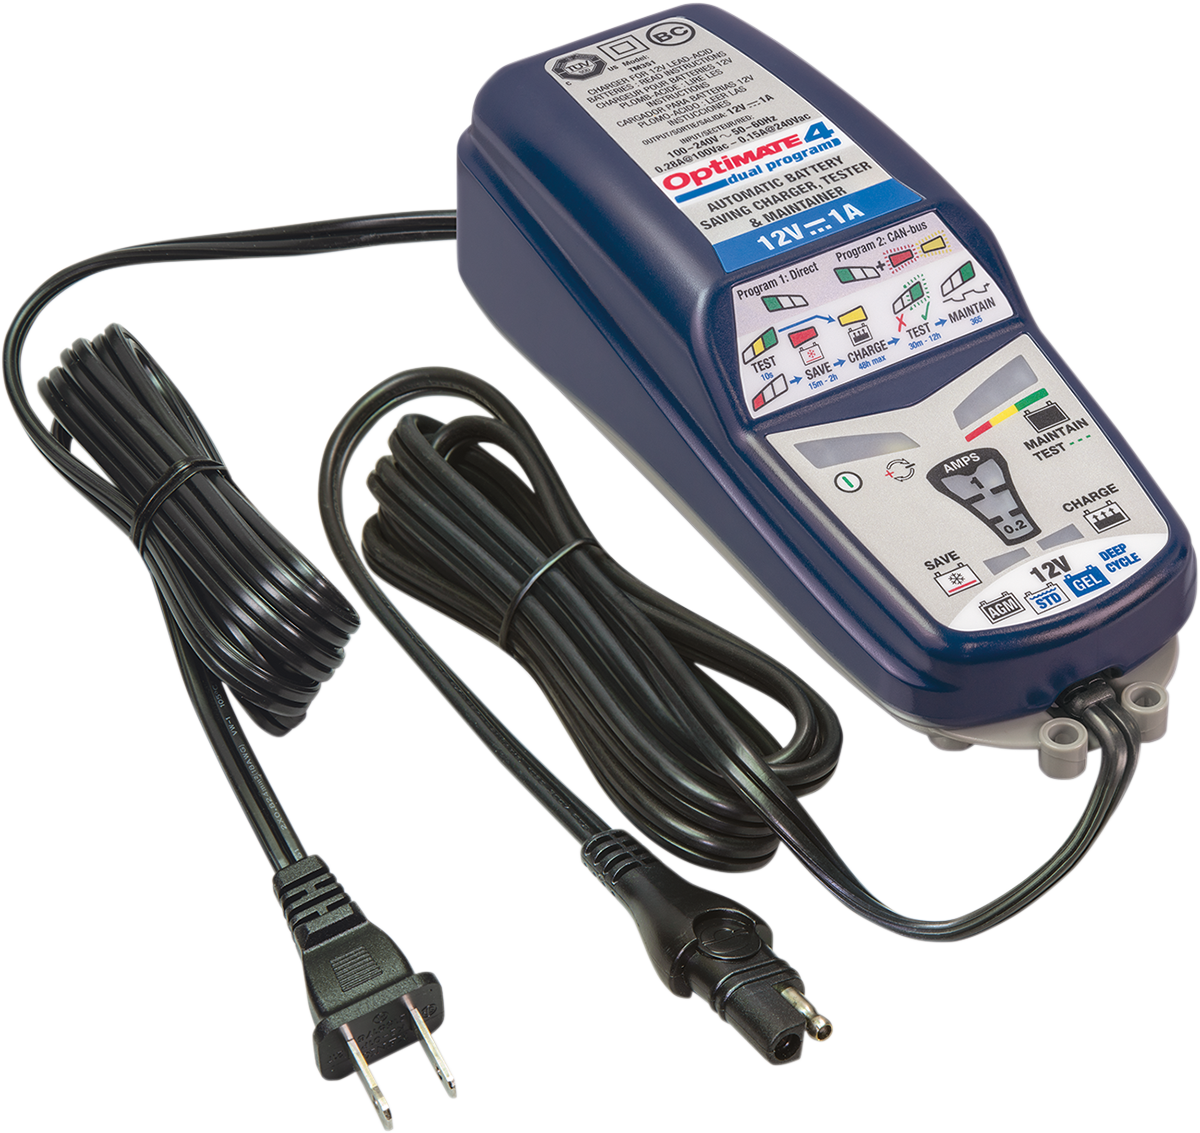 Tecmate Optimate 4 Dual Blue White Universal Motorcycle Battery Tender Charger